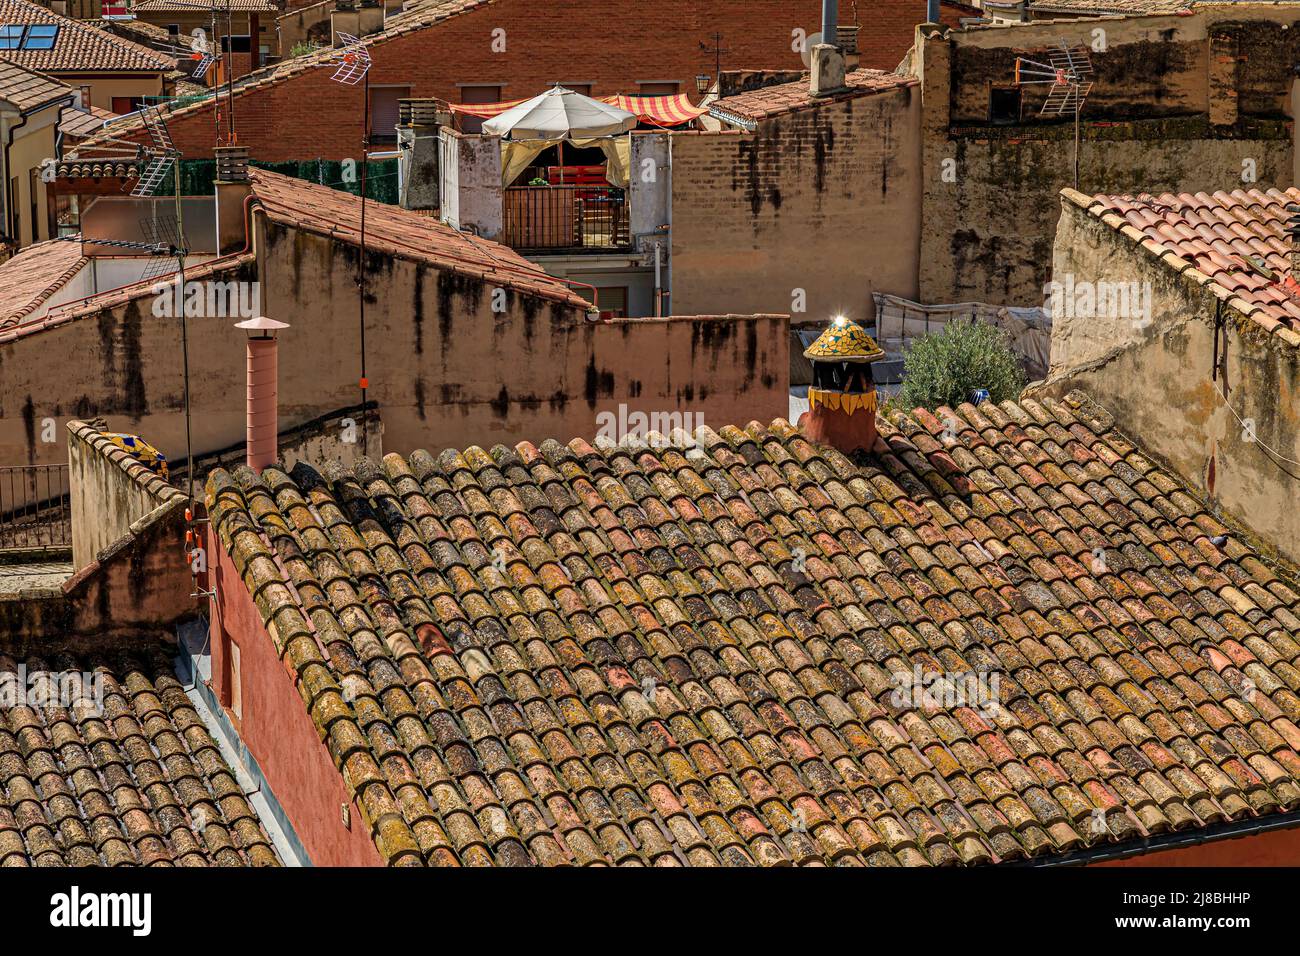 Aerial view of terracotta tiles of the roofs of medieval stone houses in Olite, Spain famous for a magnificent Royal Palace castle Stock Photo